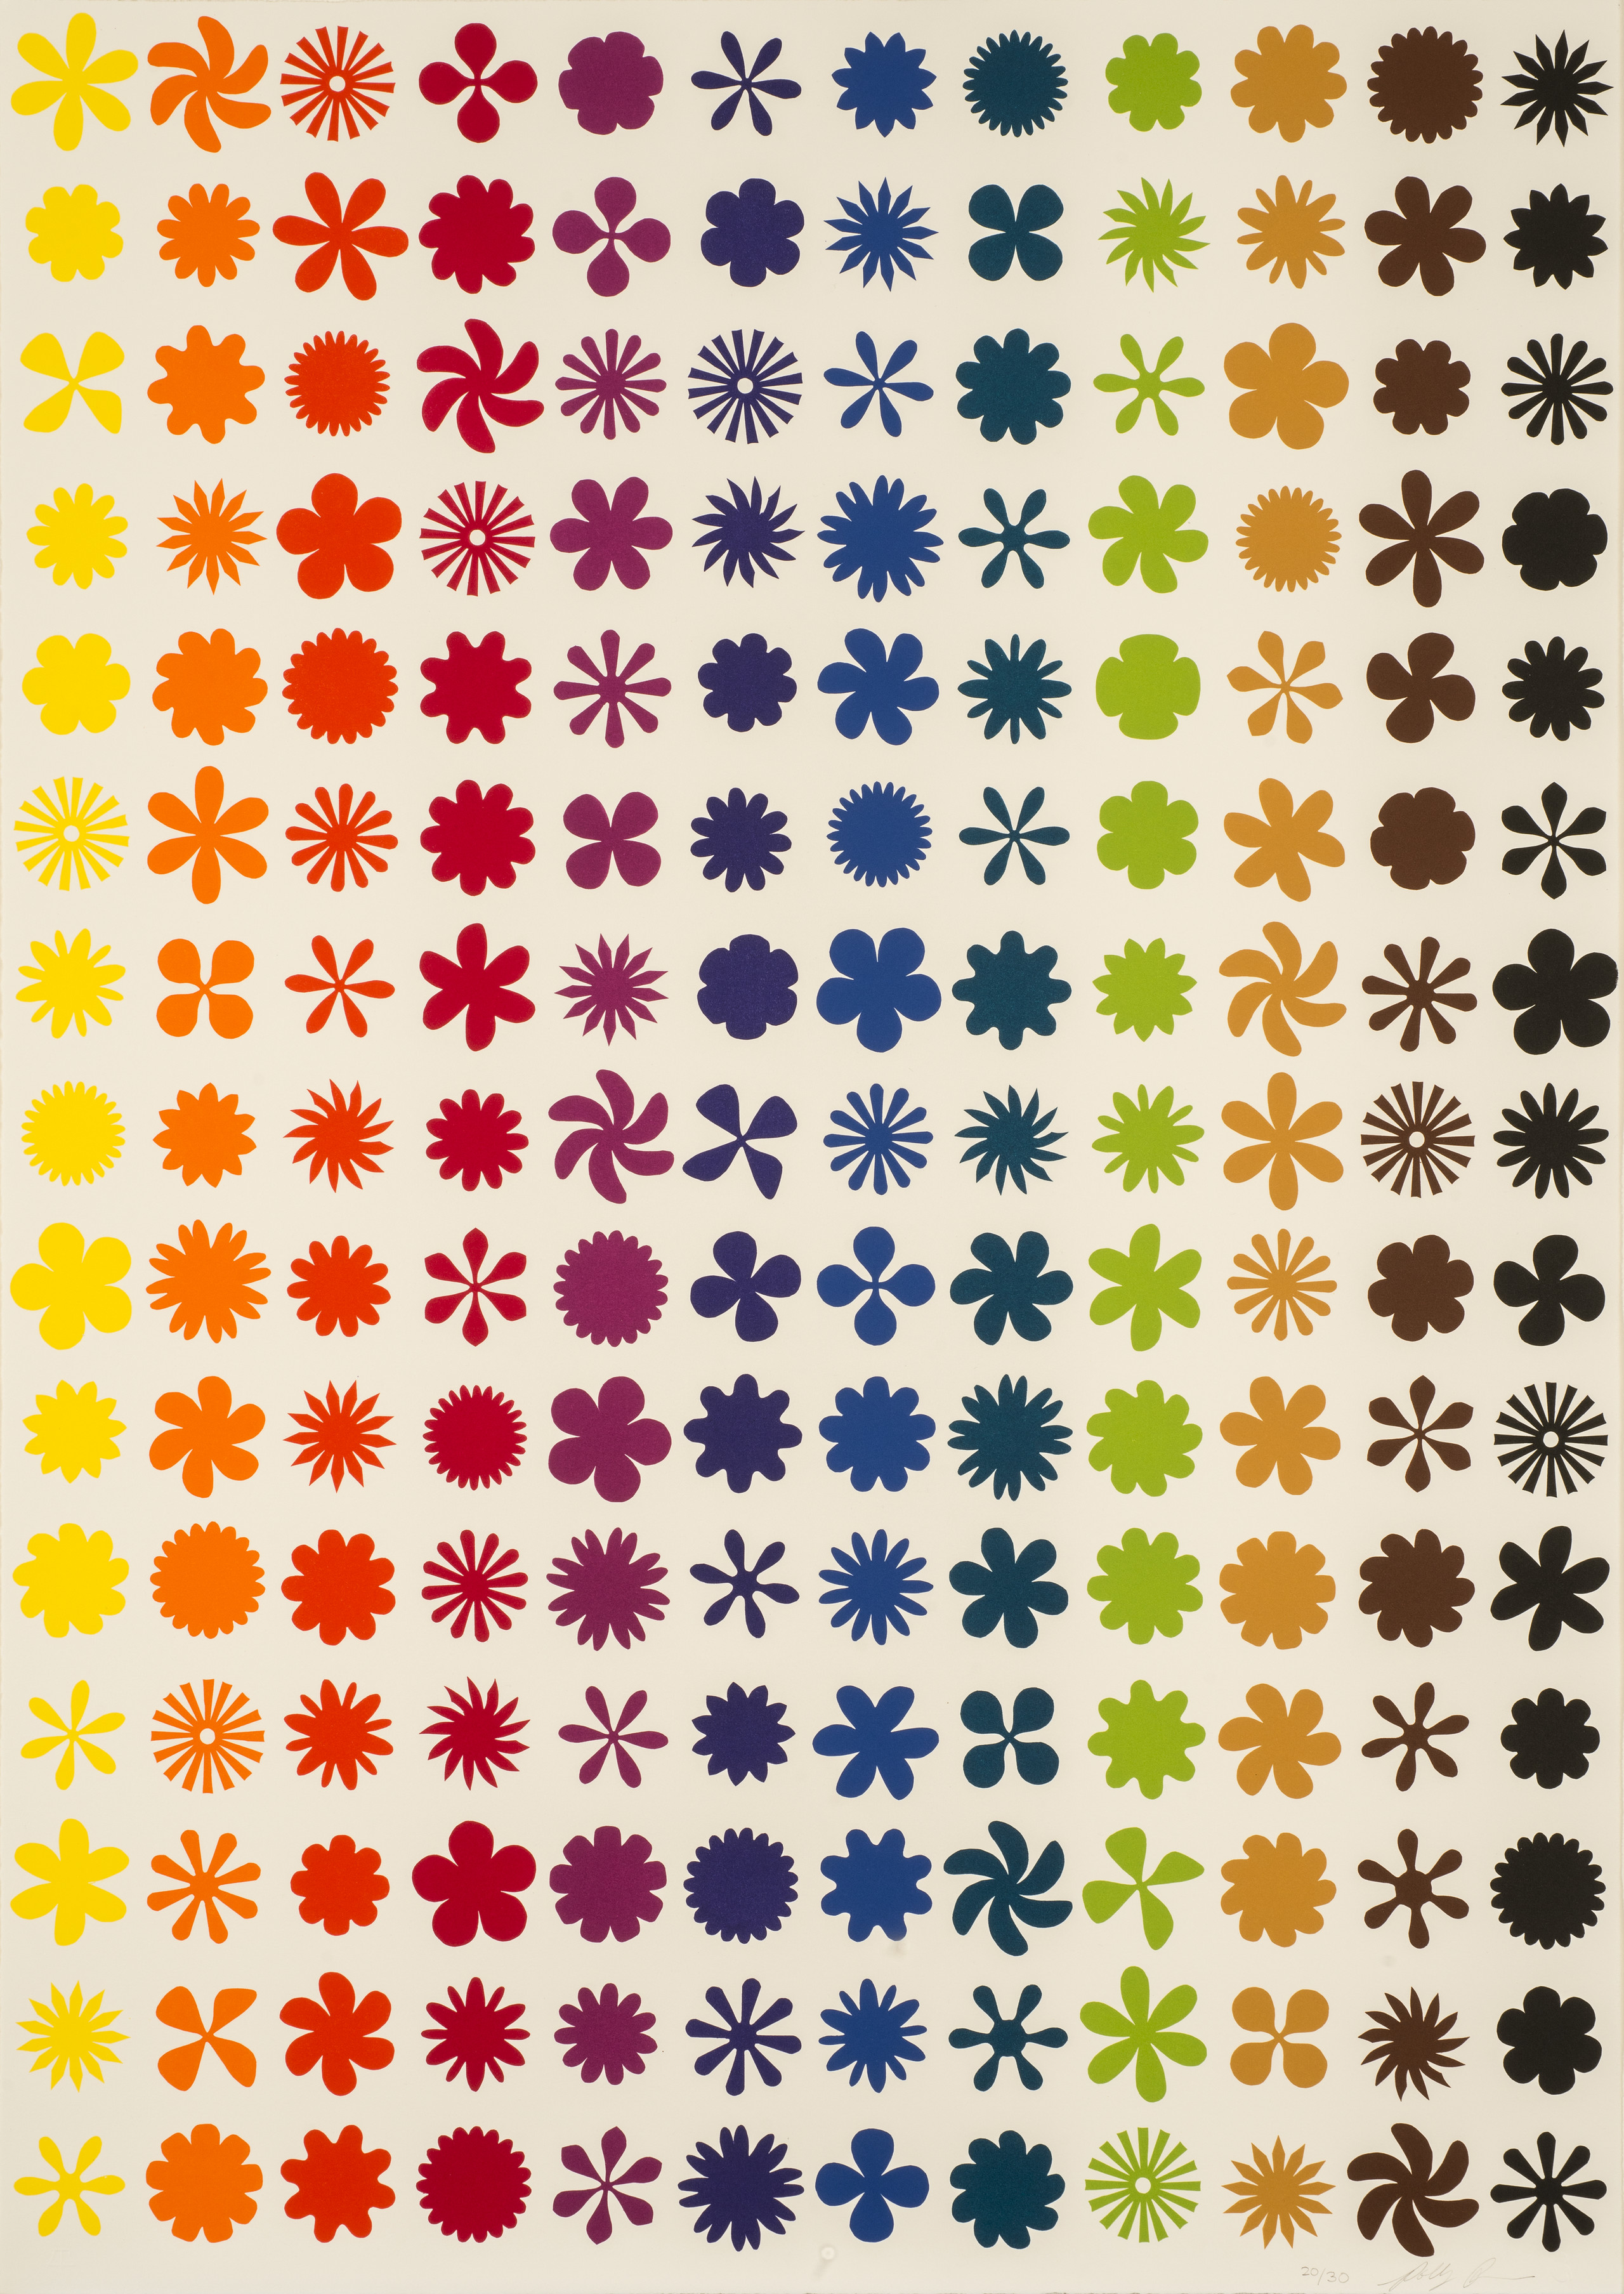 Twelve vertical columns, each a different color, of repeating flower, pinwheel, and starburst shapes on a white background.